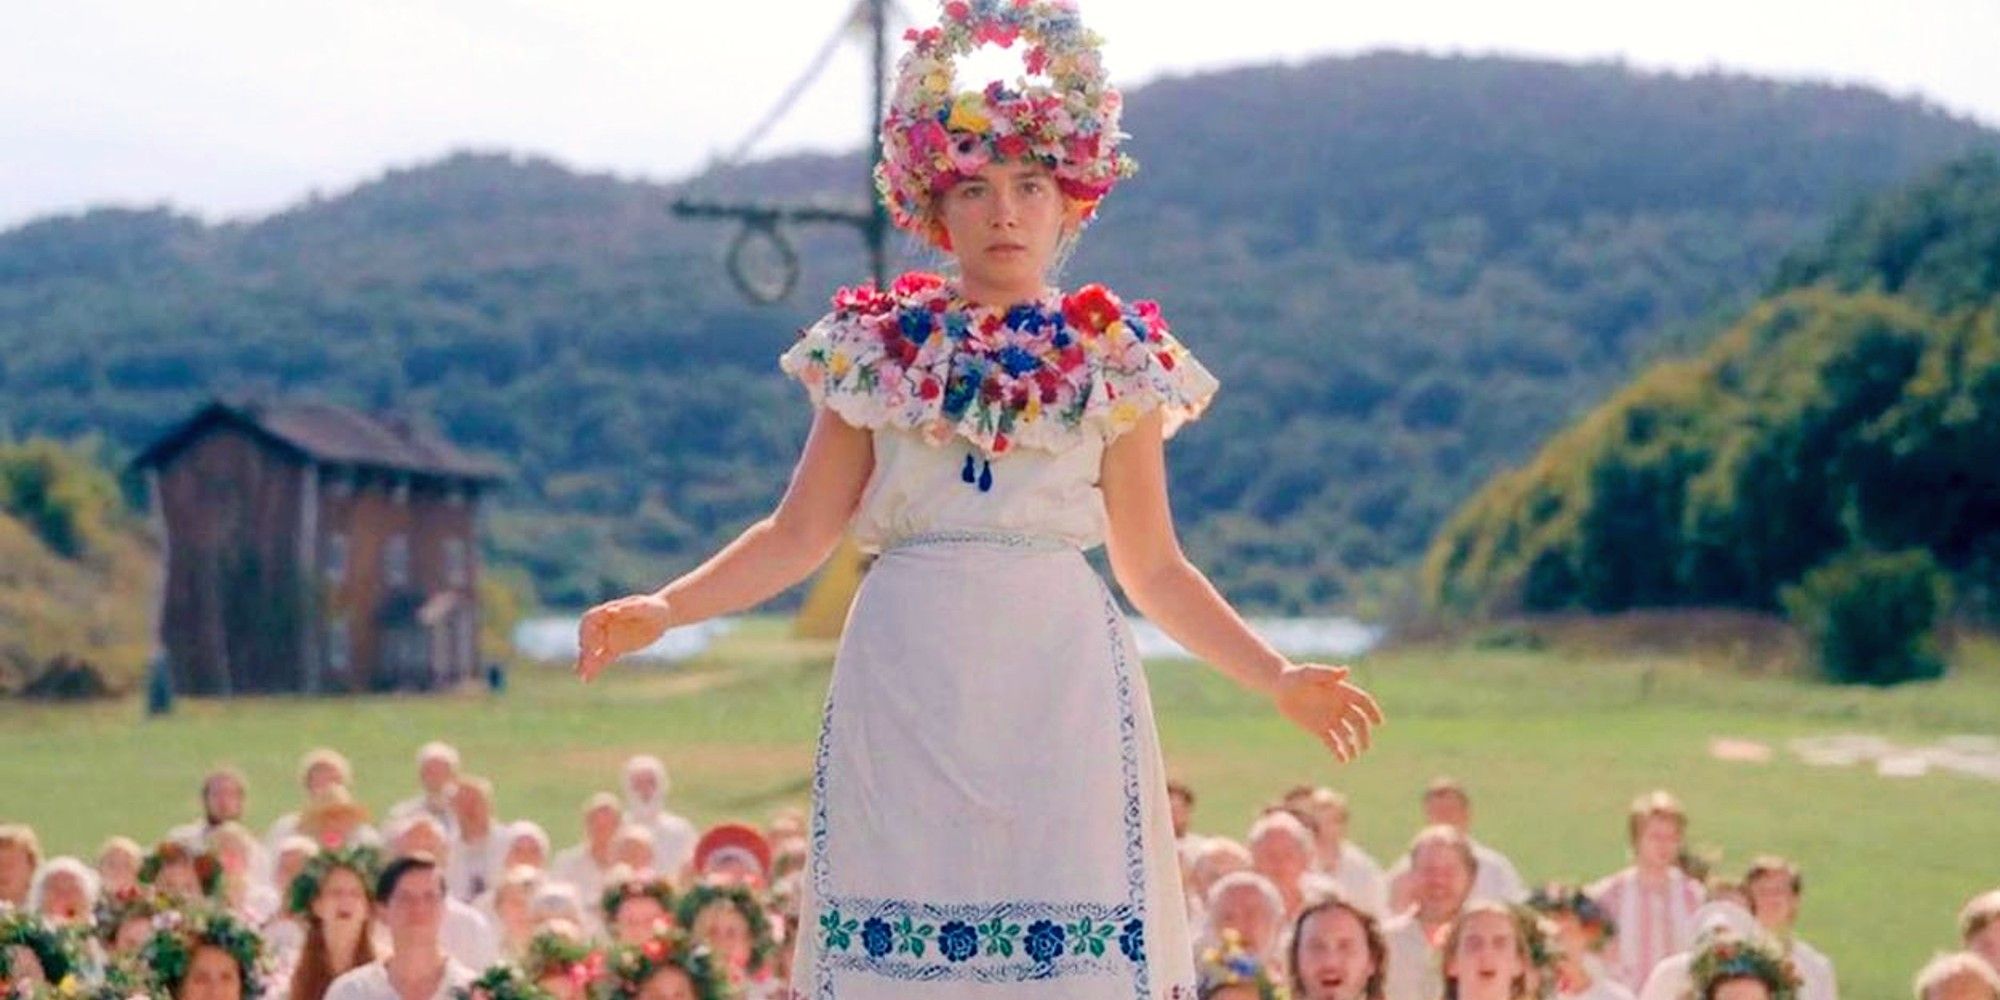 Florence Pugh as Dani Ardor dressed as the May Queen, standing stunned with her arms spread in Midsommar